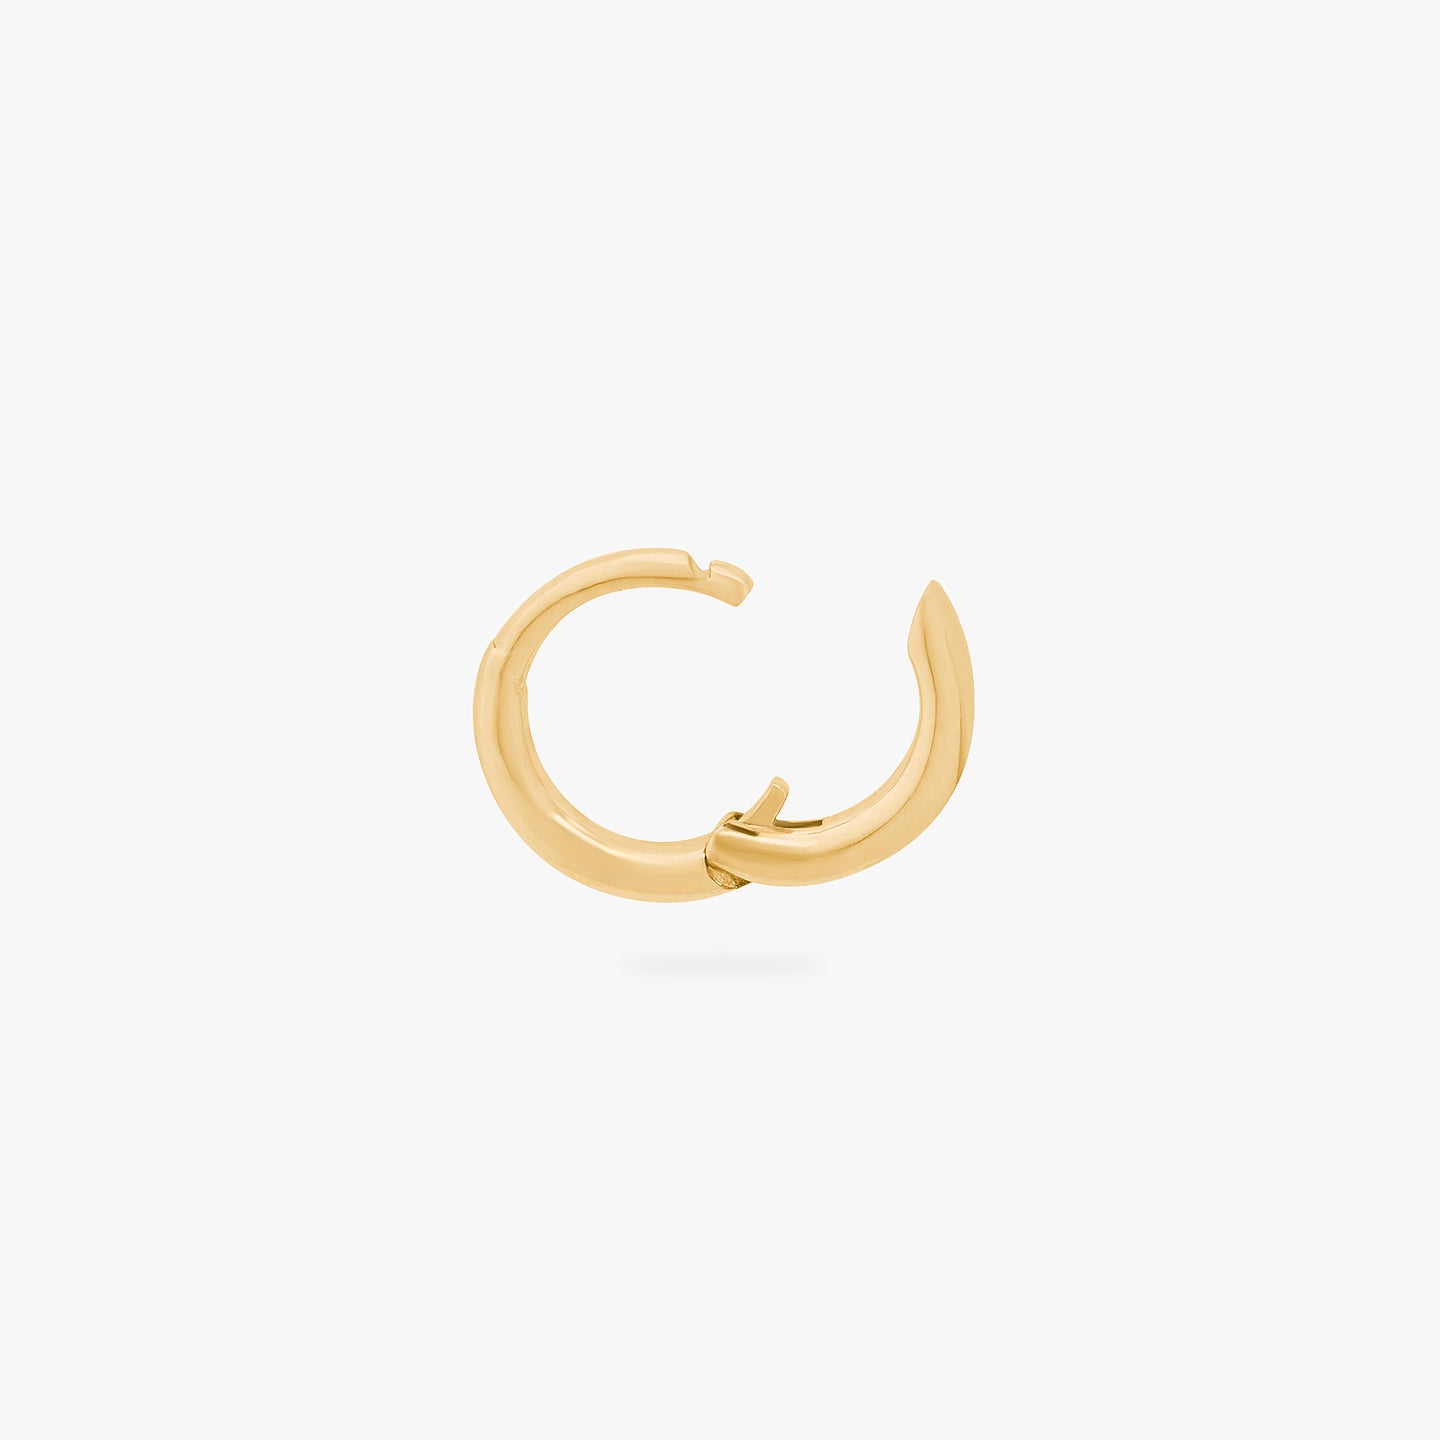 An image of a micro-sized gold huggie (6mm inner diameter) unhinged. color:null|gold